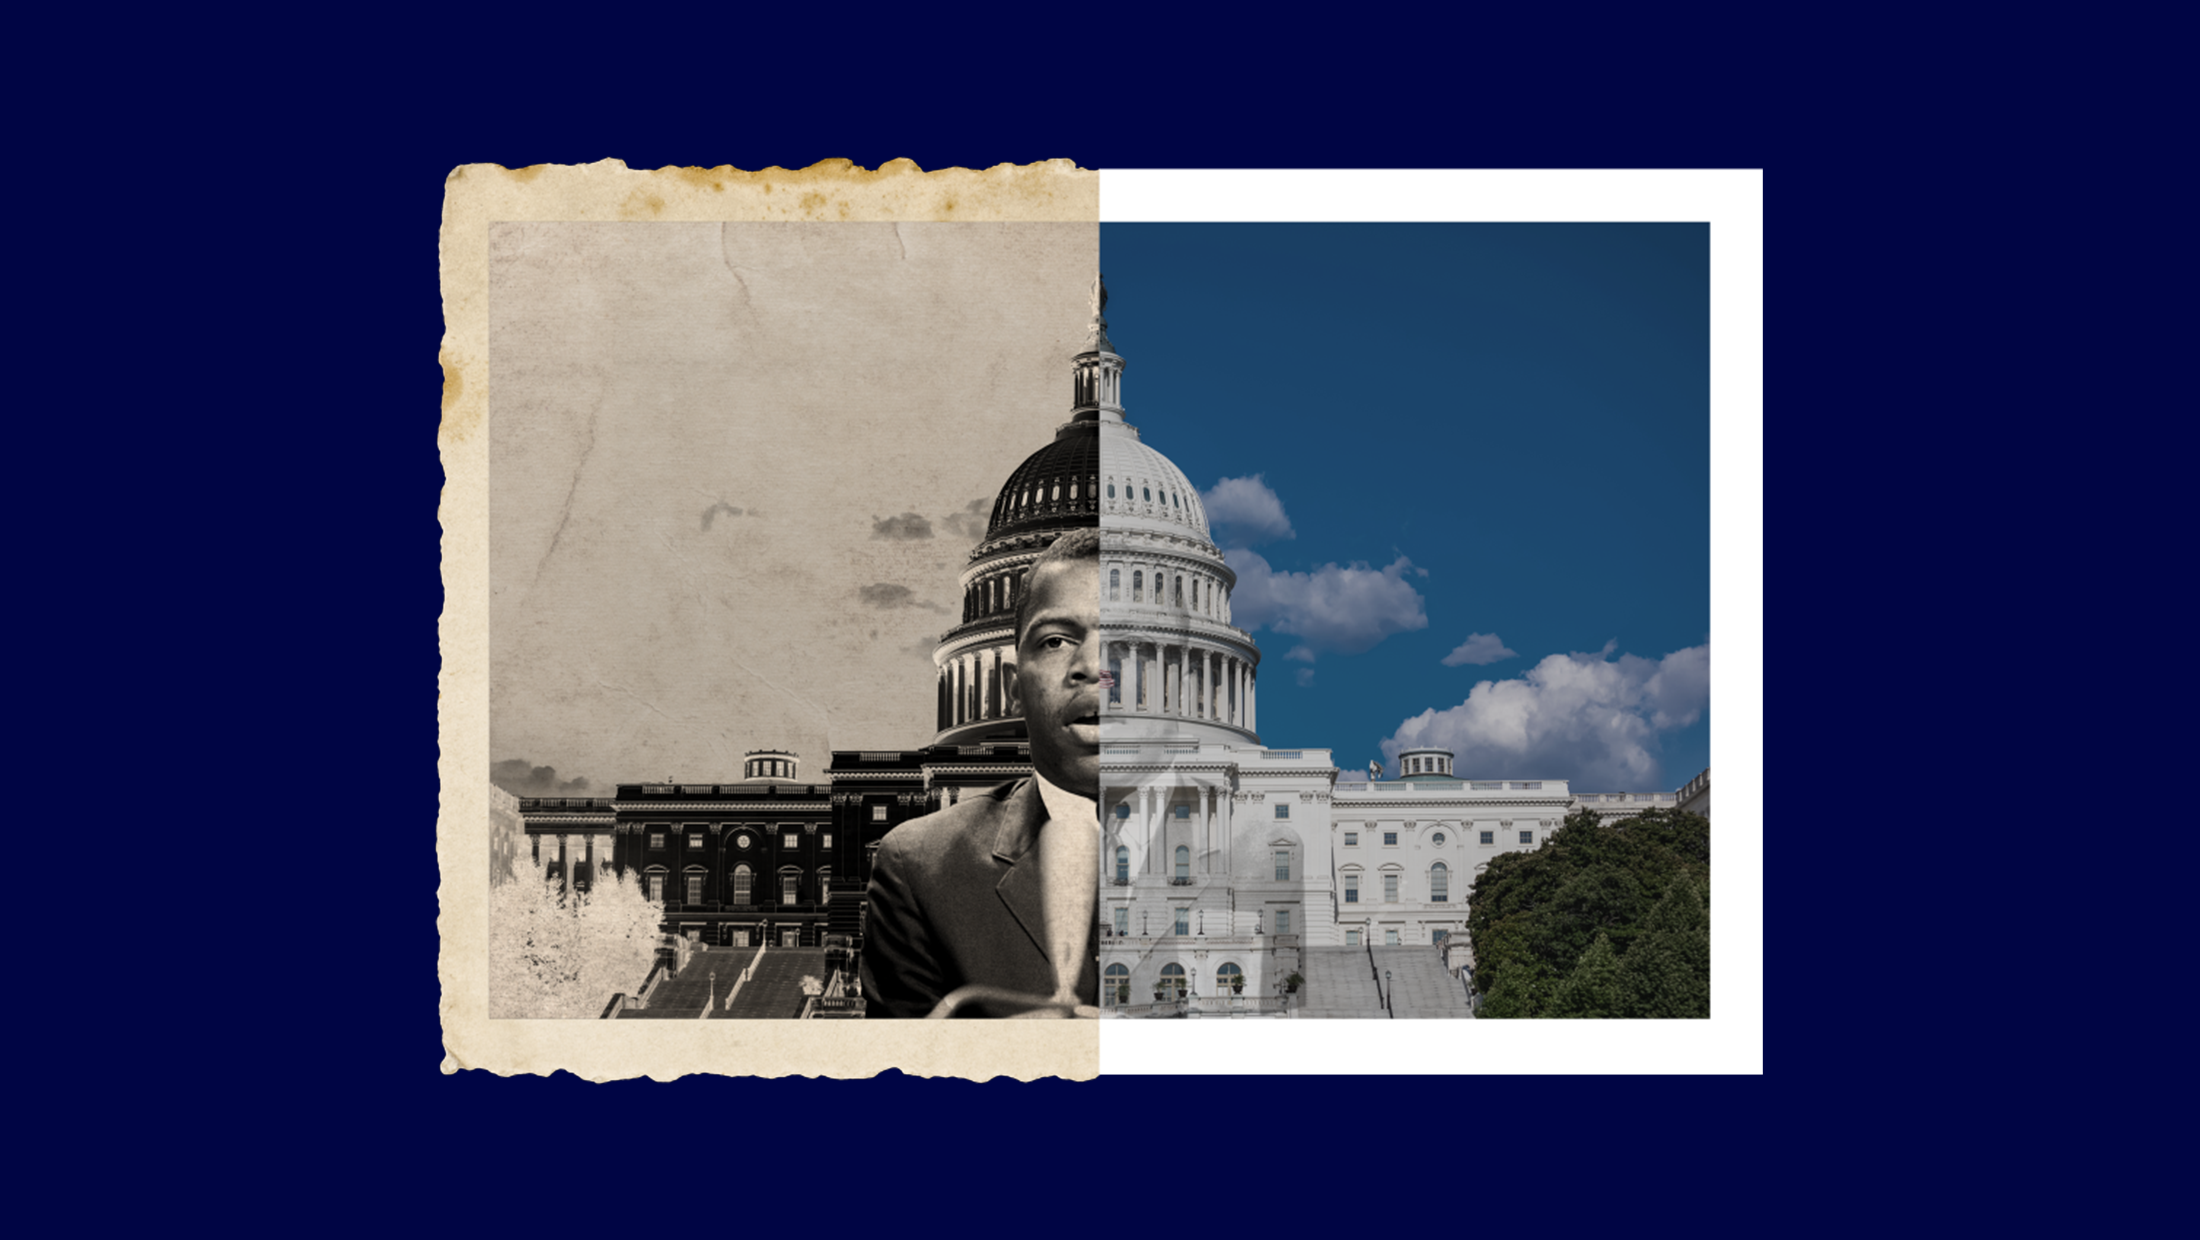 A scrapbook photo of a young John Lewis standing in front of the U.S. Capitol. The left-side of the photo features half of Lewis' face in black and white and appears to be old, with its corners tattered; the other half of the photo is in full color but Lewis' face has been faded to symbolize his legacy